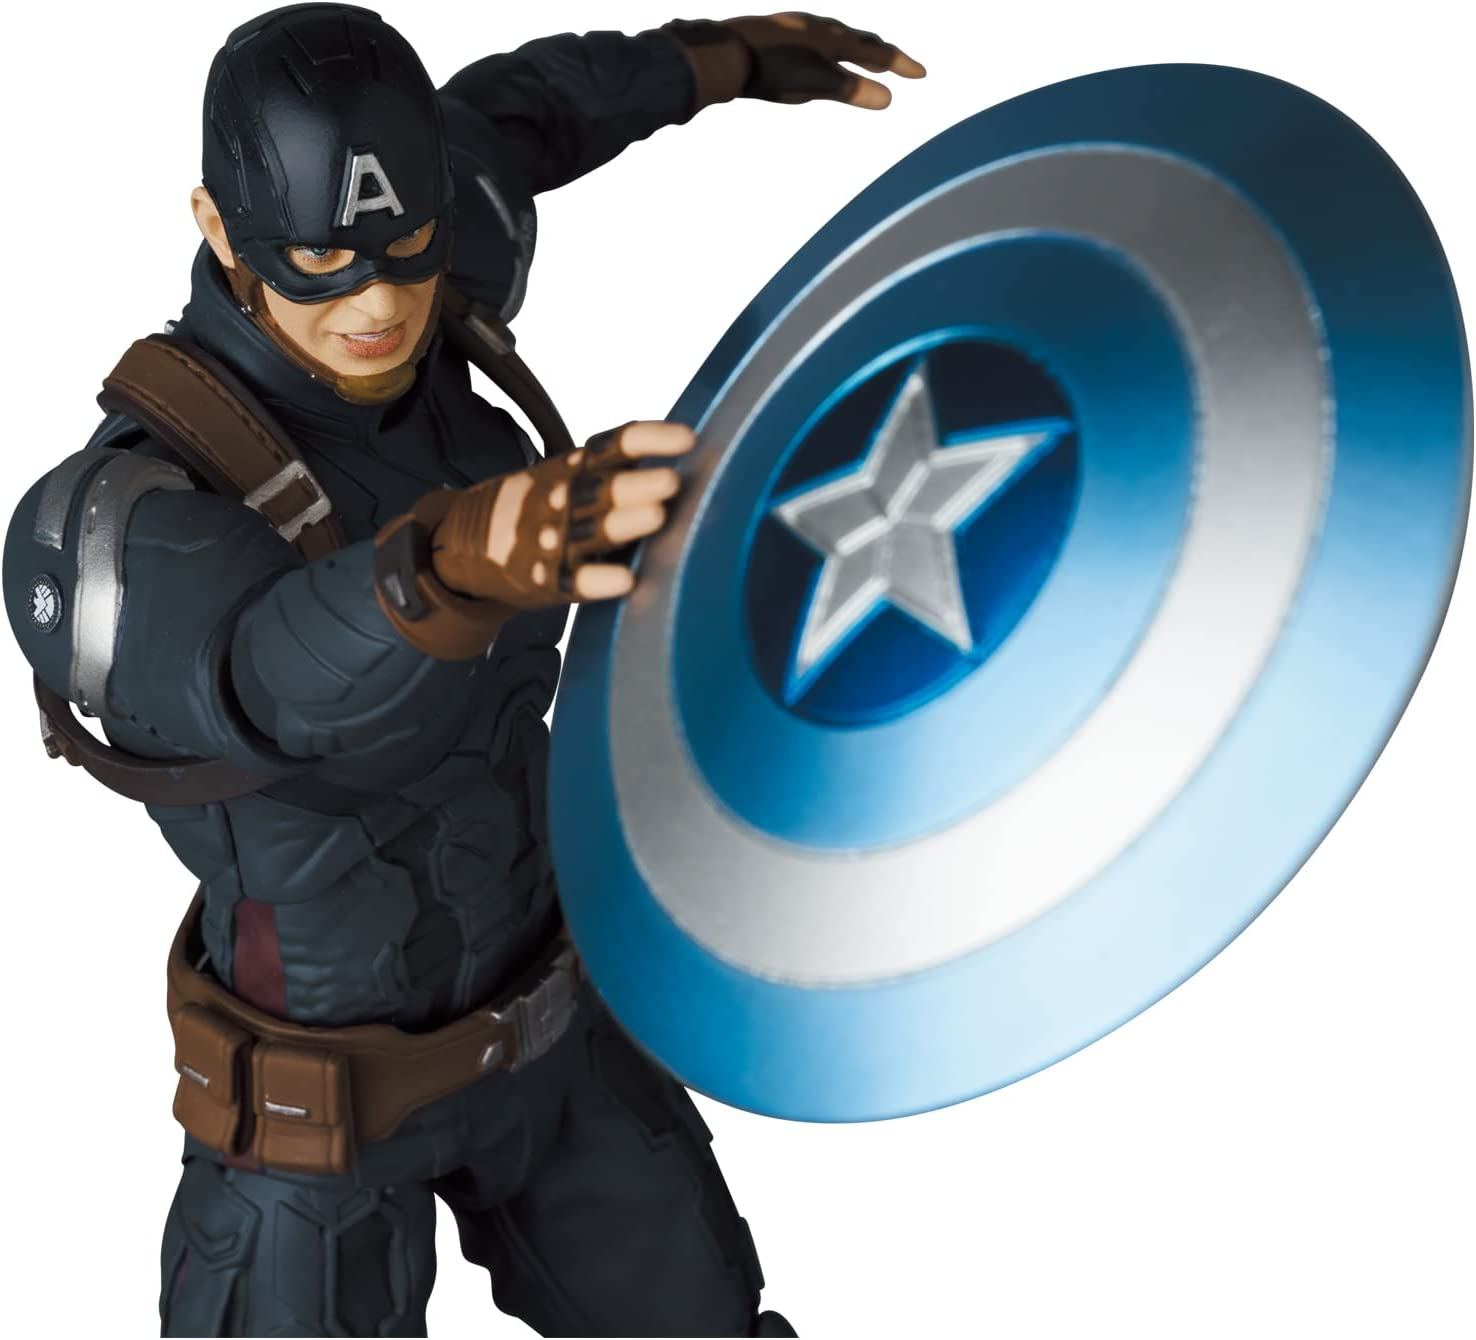 MAFEX Captain America The Winter Soldier: Captain America (Stealth 